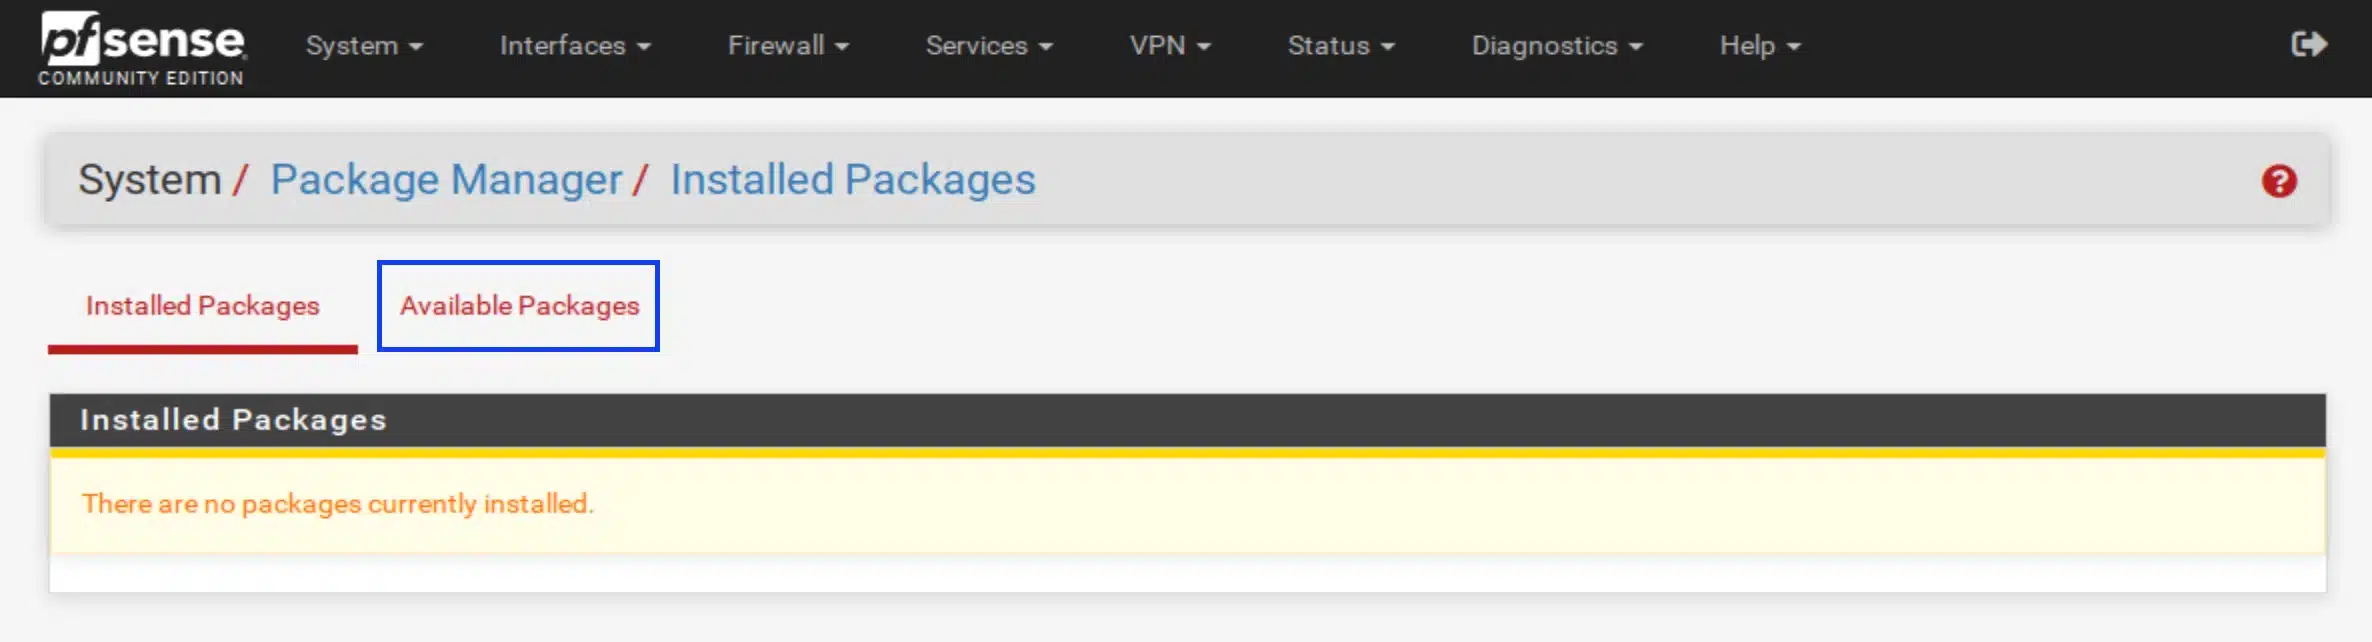 pfSense - RoadWarrior - WireGuard - Available Packages